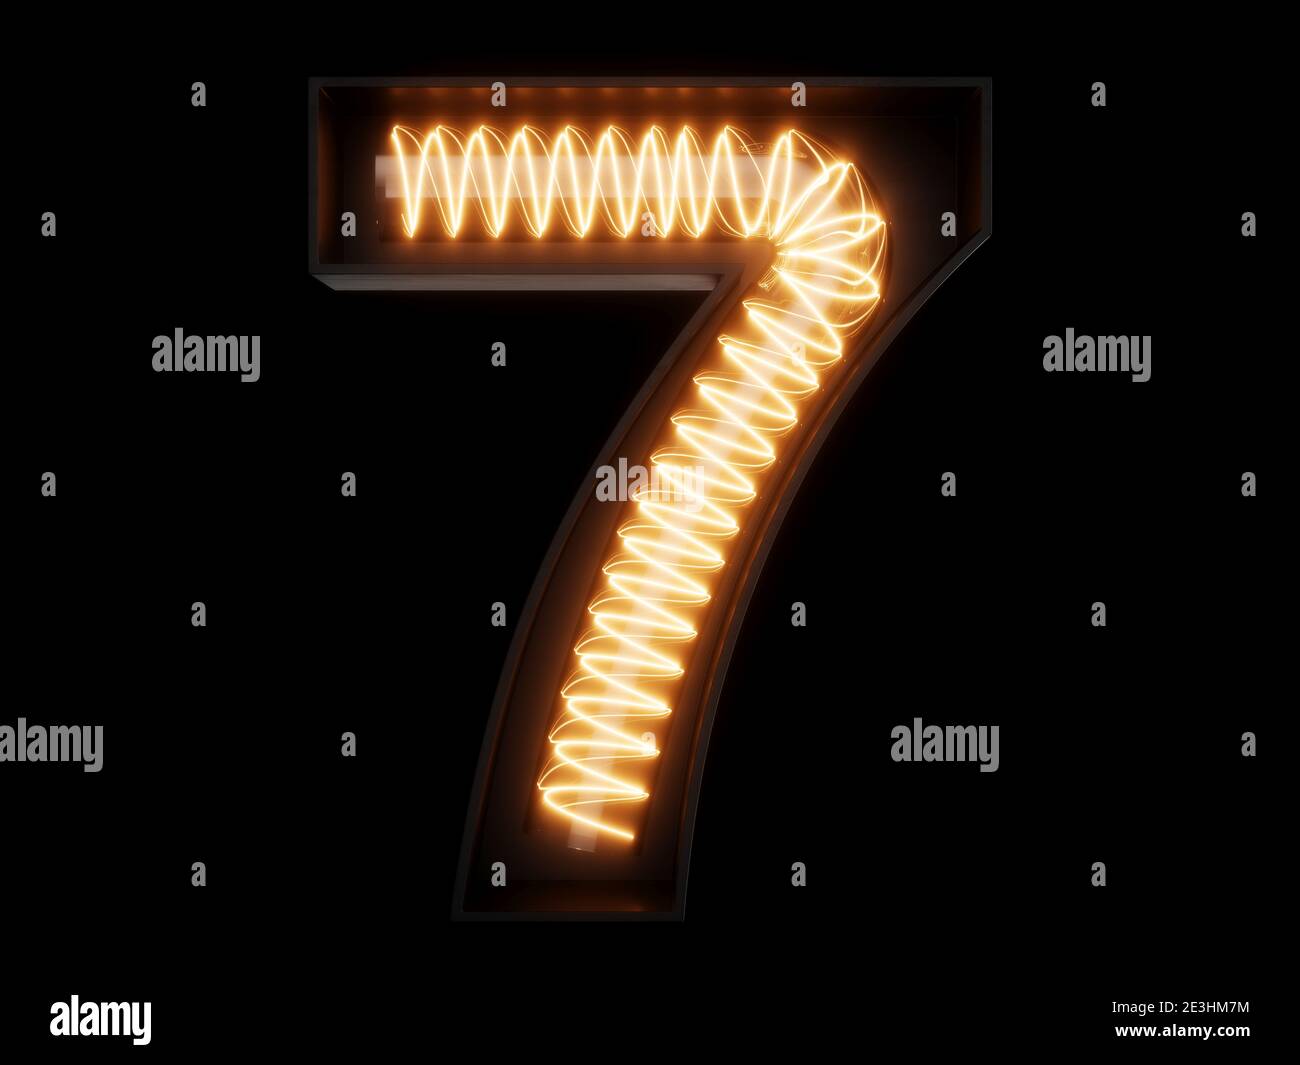 Light bulb spiral glowing digit alphabet character 7 seven font. Front view illuminated number 7 symbol on black background. 3d rendering illustration Stock Photo